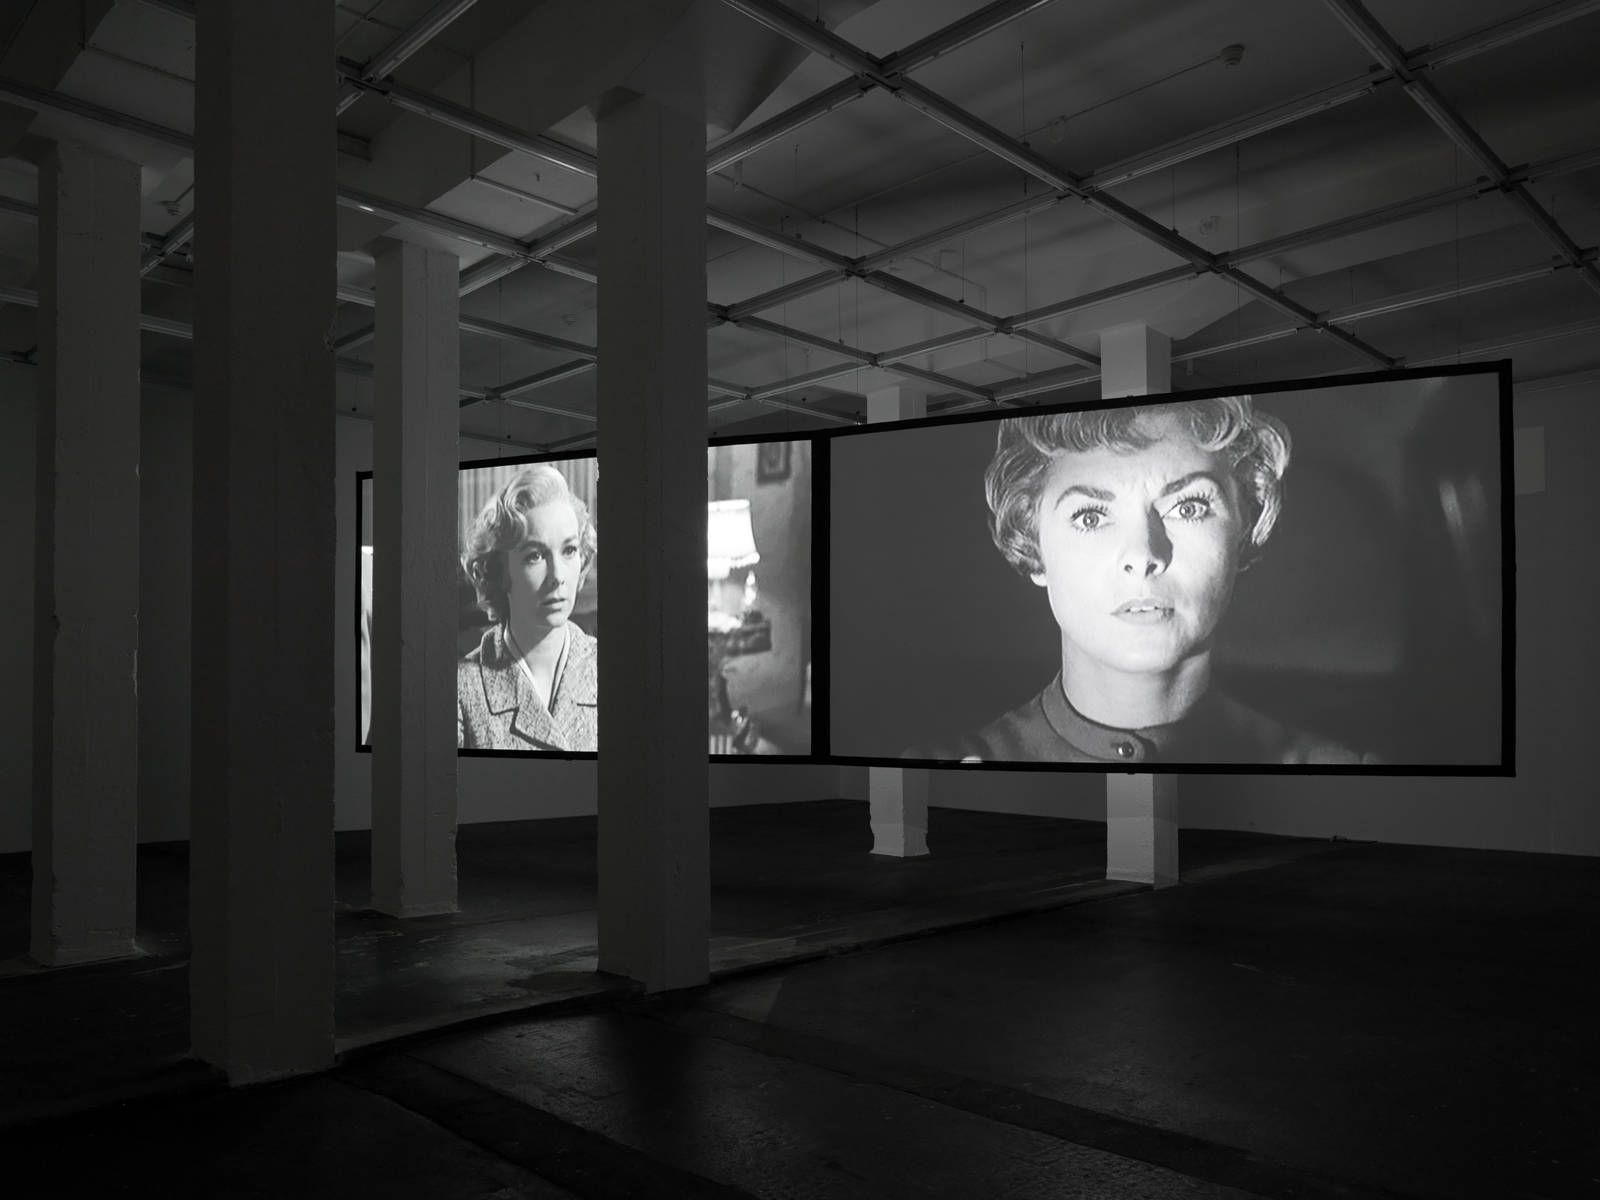 Douglas Gordon / "24 Hour Psycho Back and Forth and To and Fro", exhibition view, Galerie Eva Presenhuber, Zürich